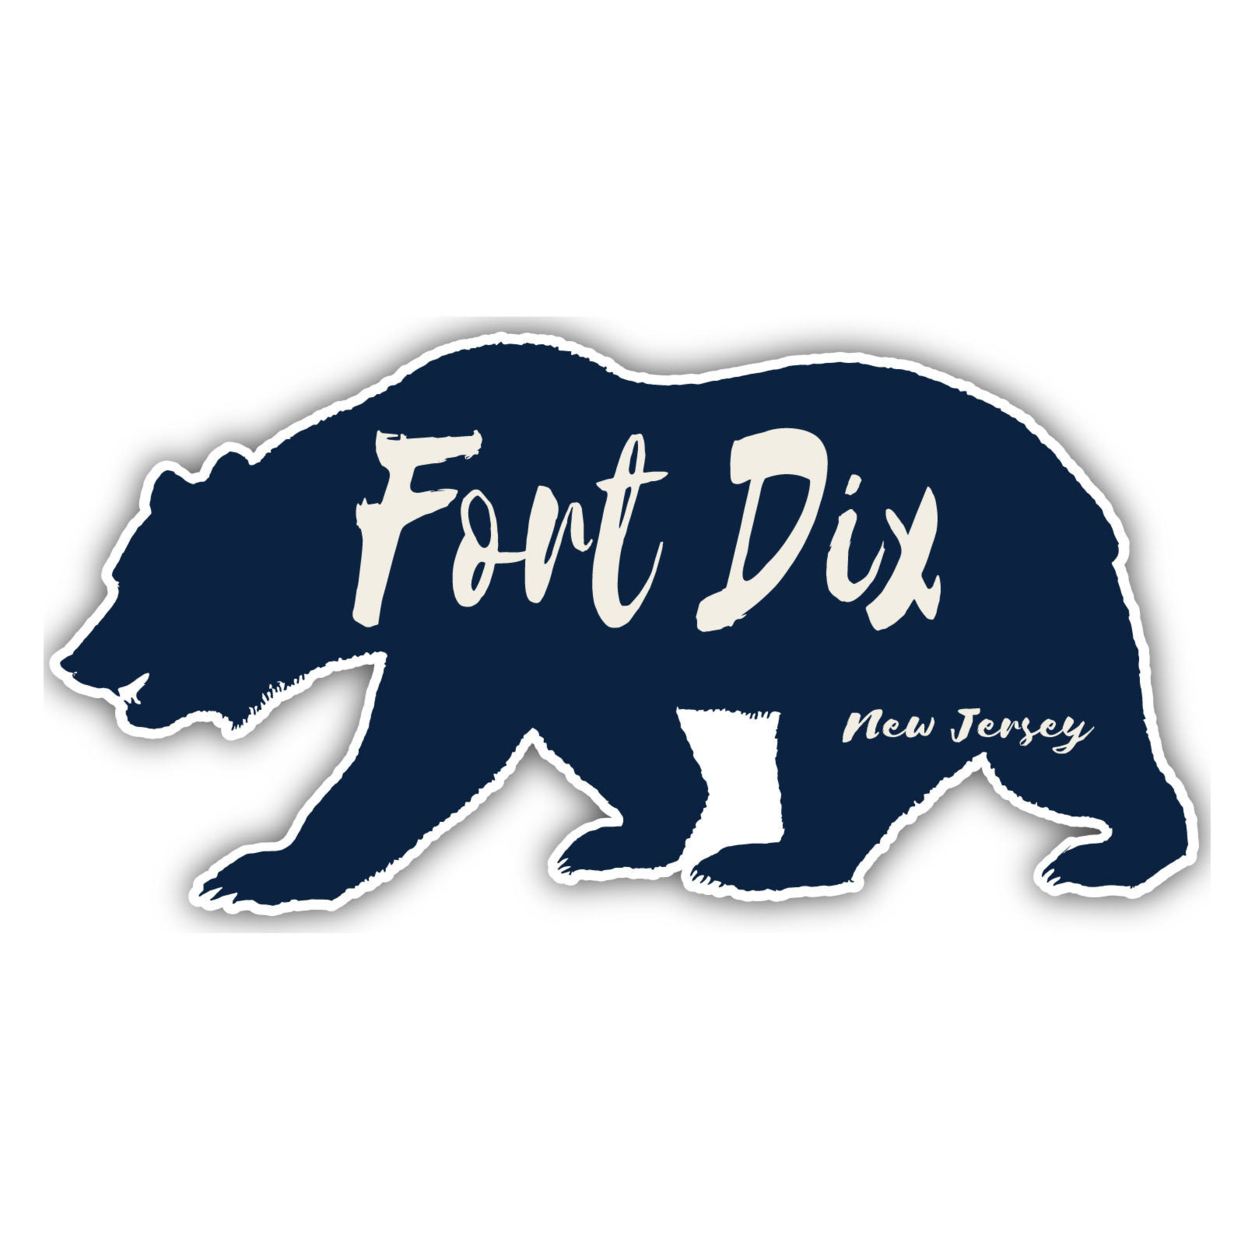 Fort Dix New Jersey Souvenir Decorative Stickers (Choose Theme And Size) - Single Unit, 6-Inch, Great Outdoors